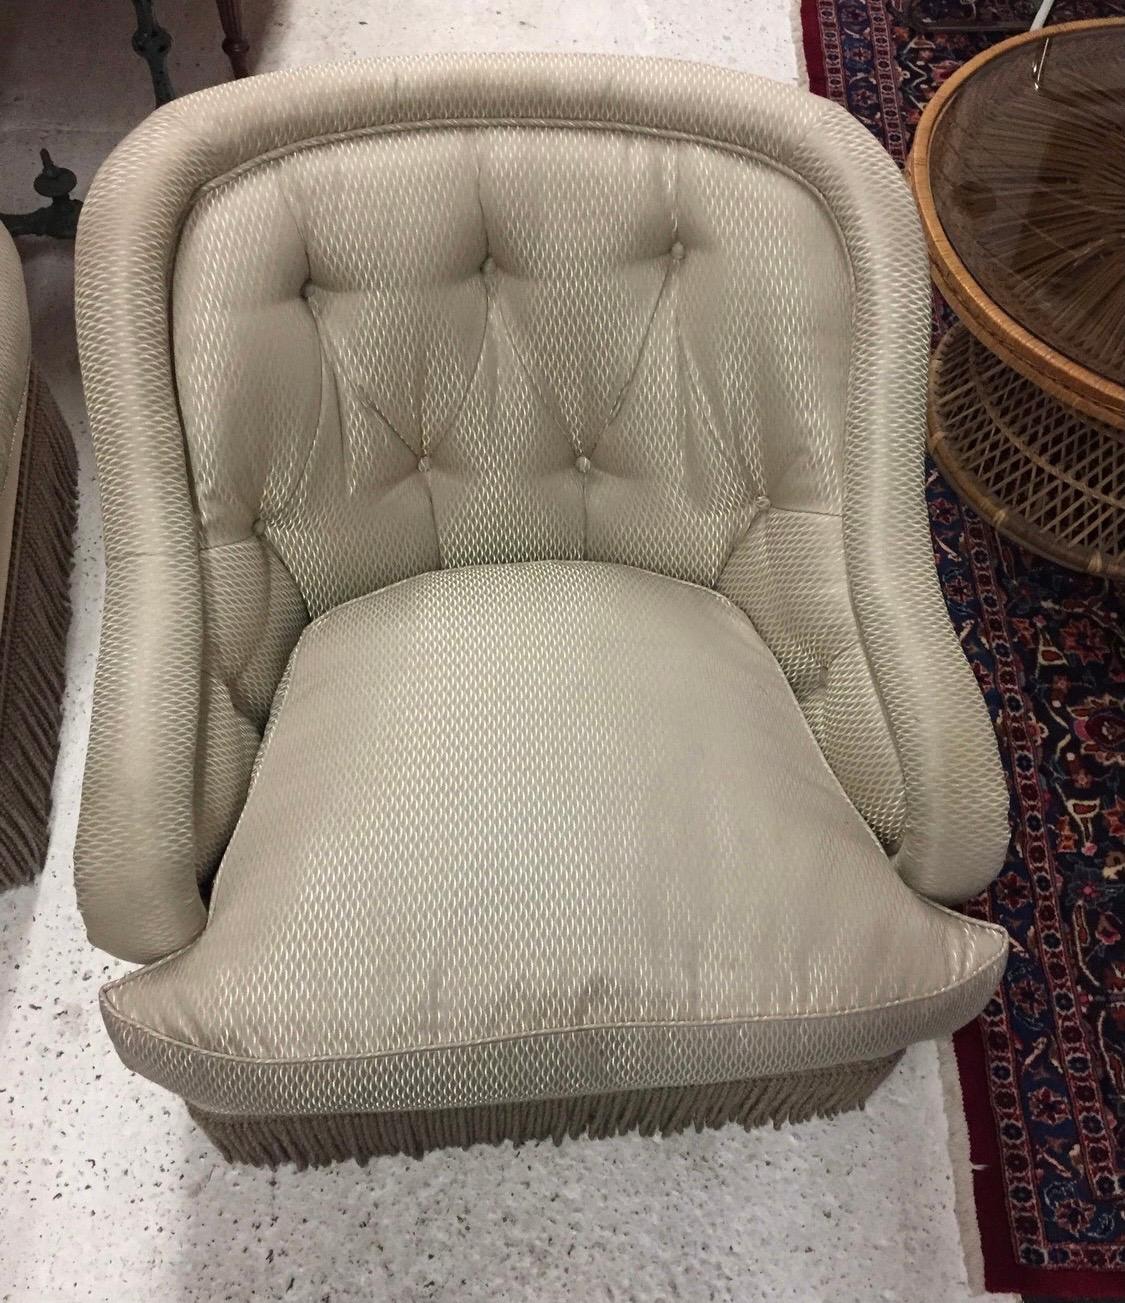 Lovely set of silver and taupe club chairs with tufted seat backs and down wrapped cushions. The chairs are accented with a fabulous rope fringe trim. They sit very comfortably and have age appropriate wear.